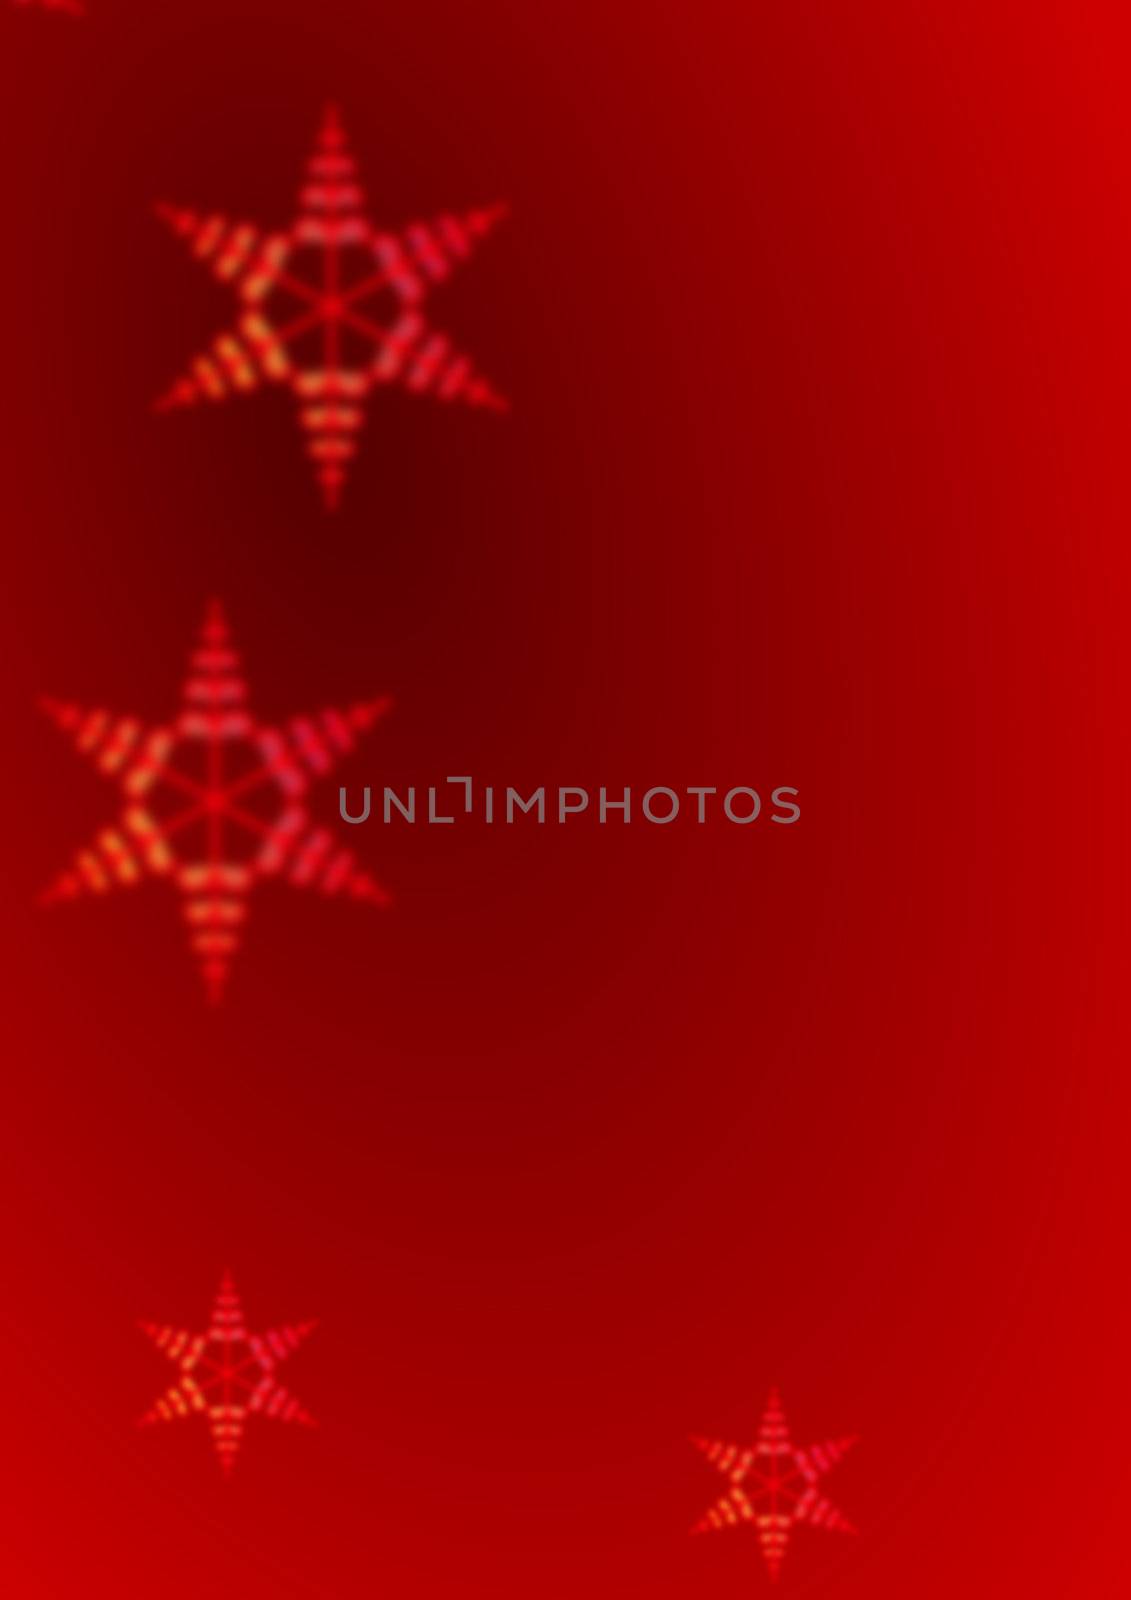 Simple festive background with soft focus snowflake shapes and copyspace